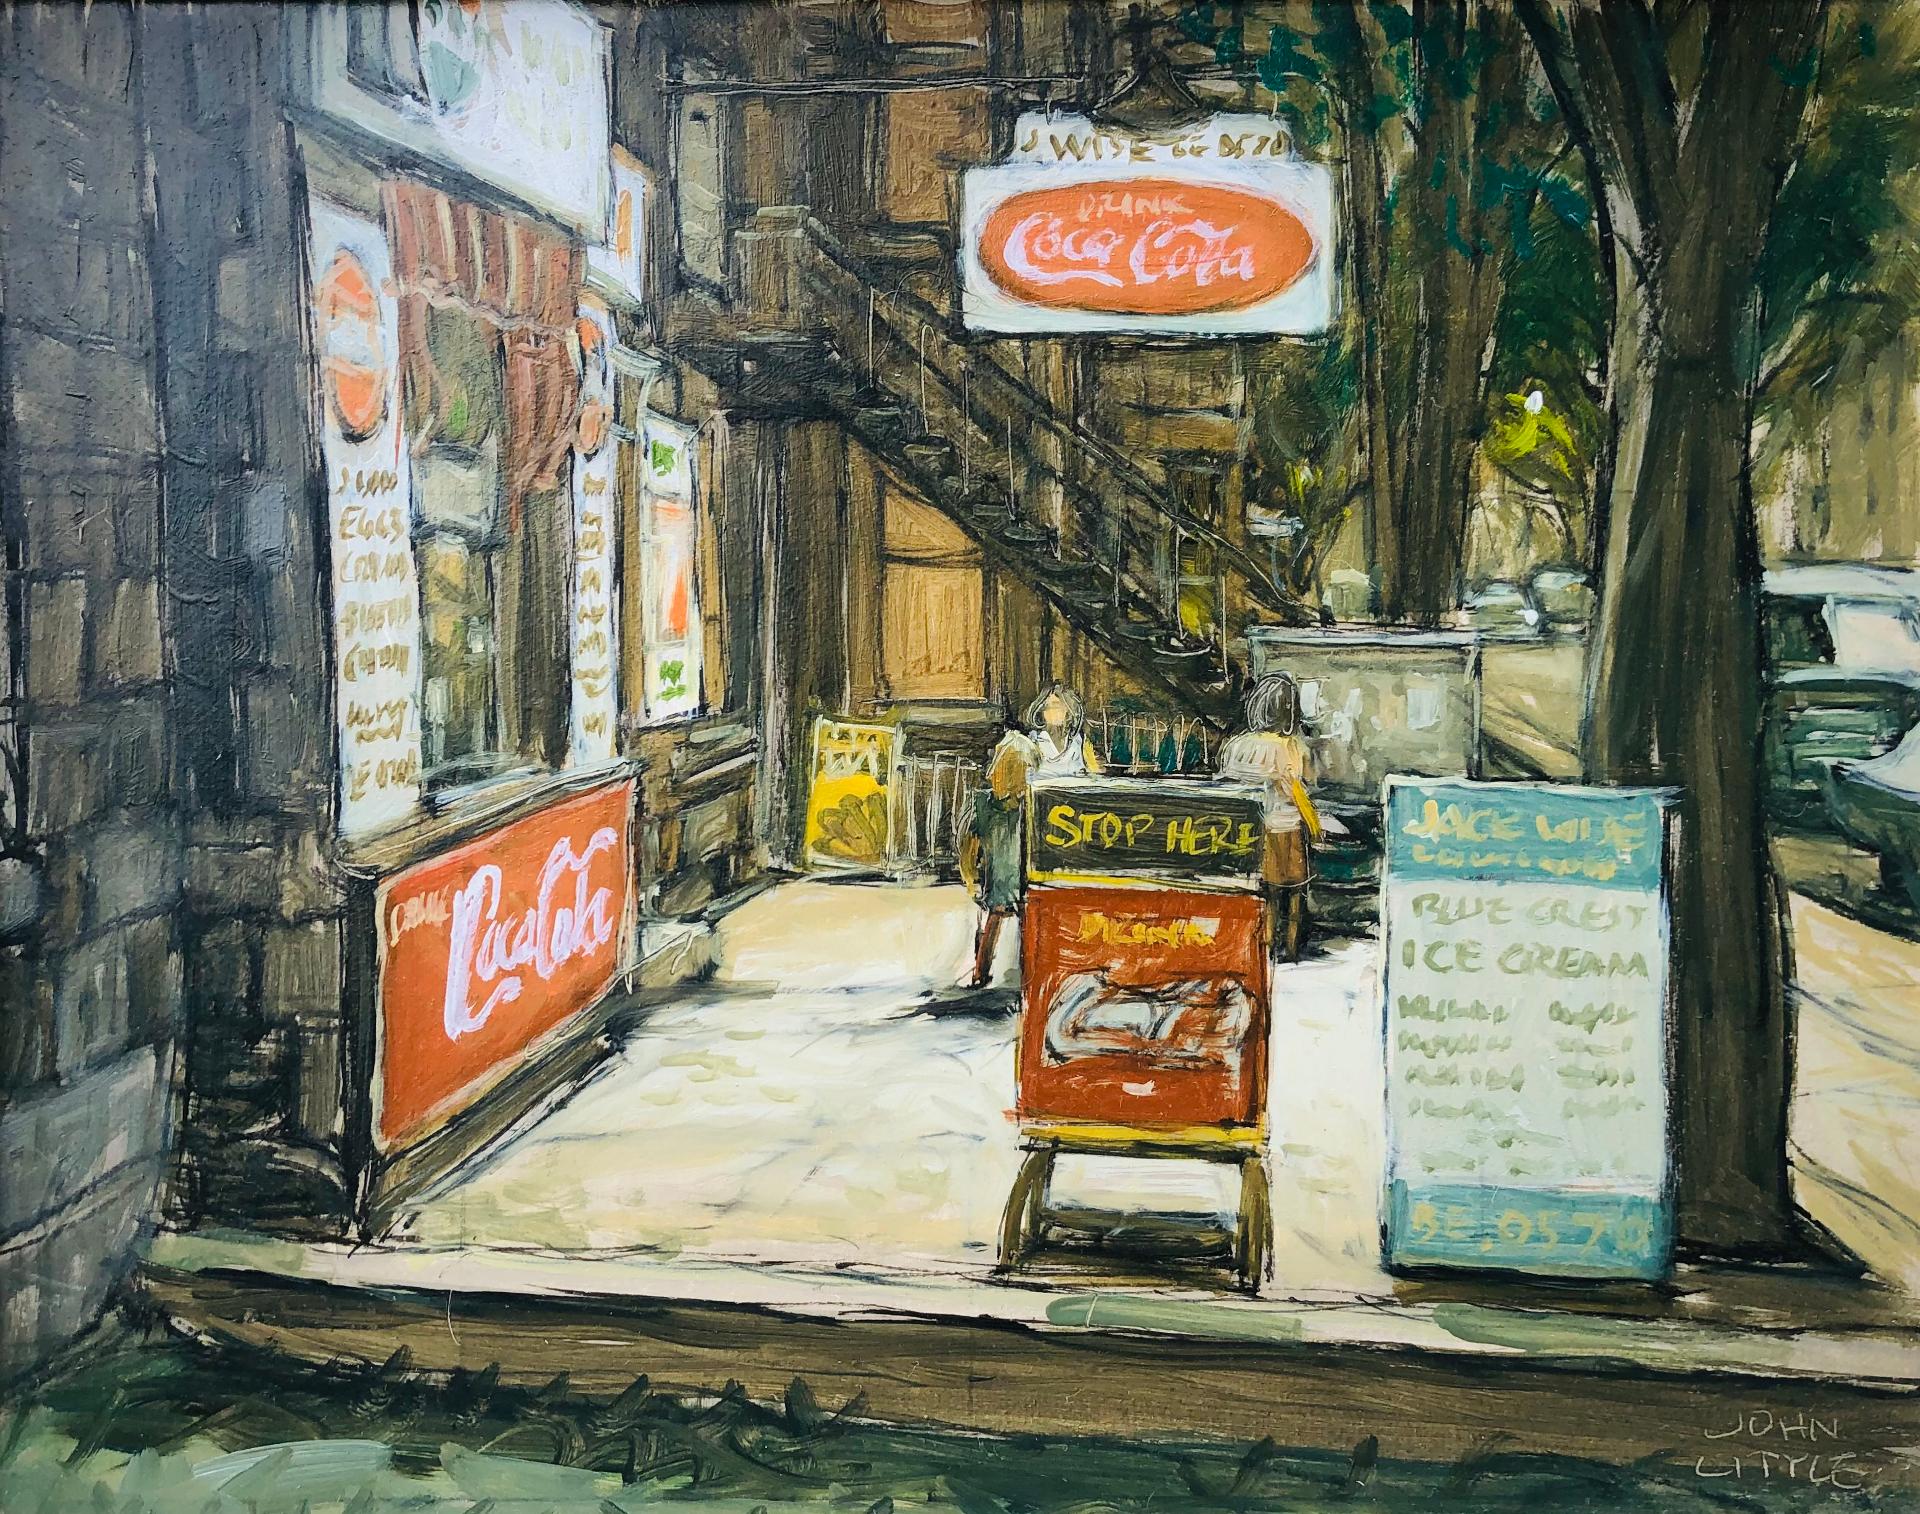 John Geoffrey Caruthers Little (1928-1984) - 1950's Jack Wise Dairy + Provisions, Mt. Royal ave, 2005